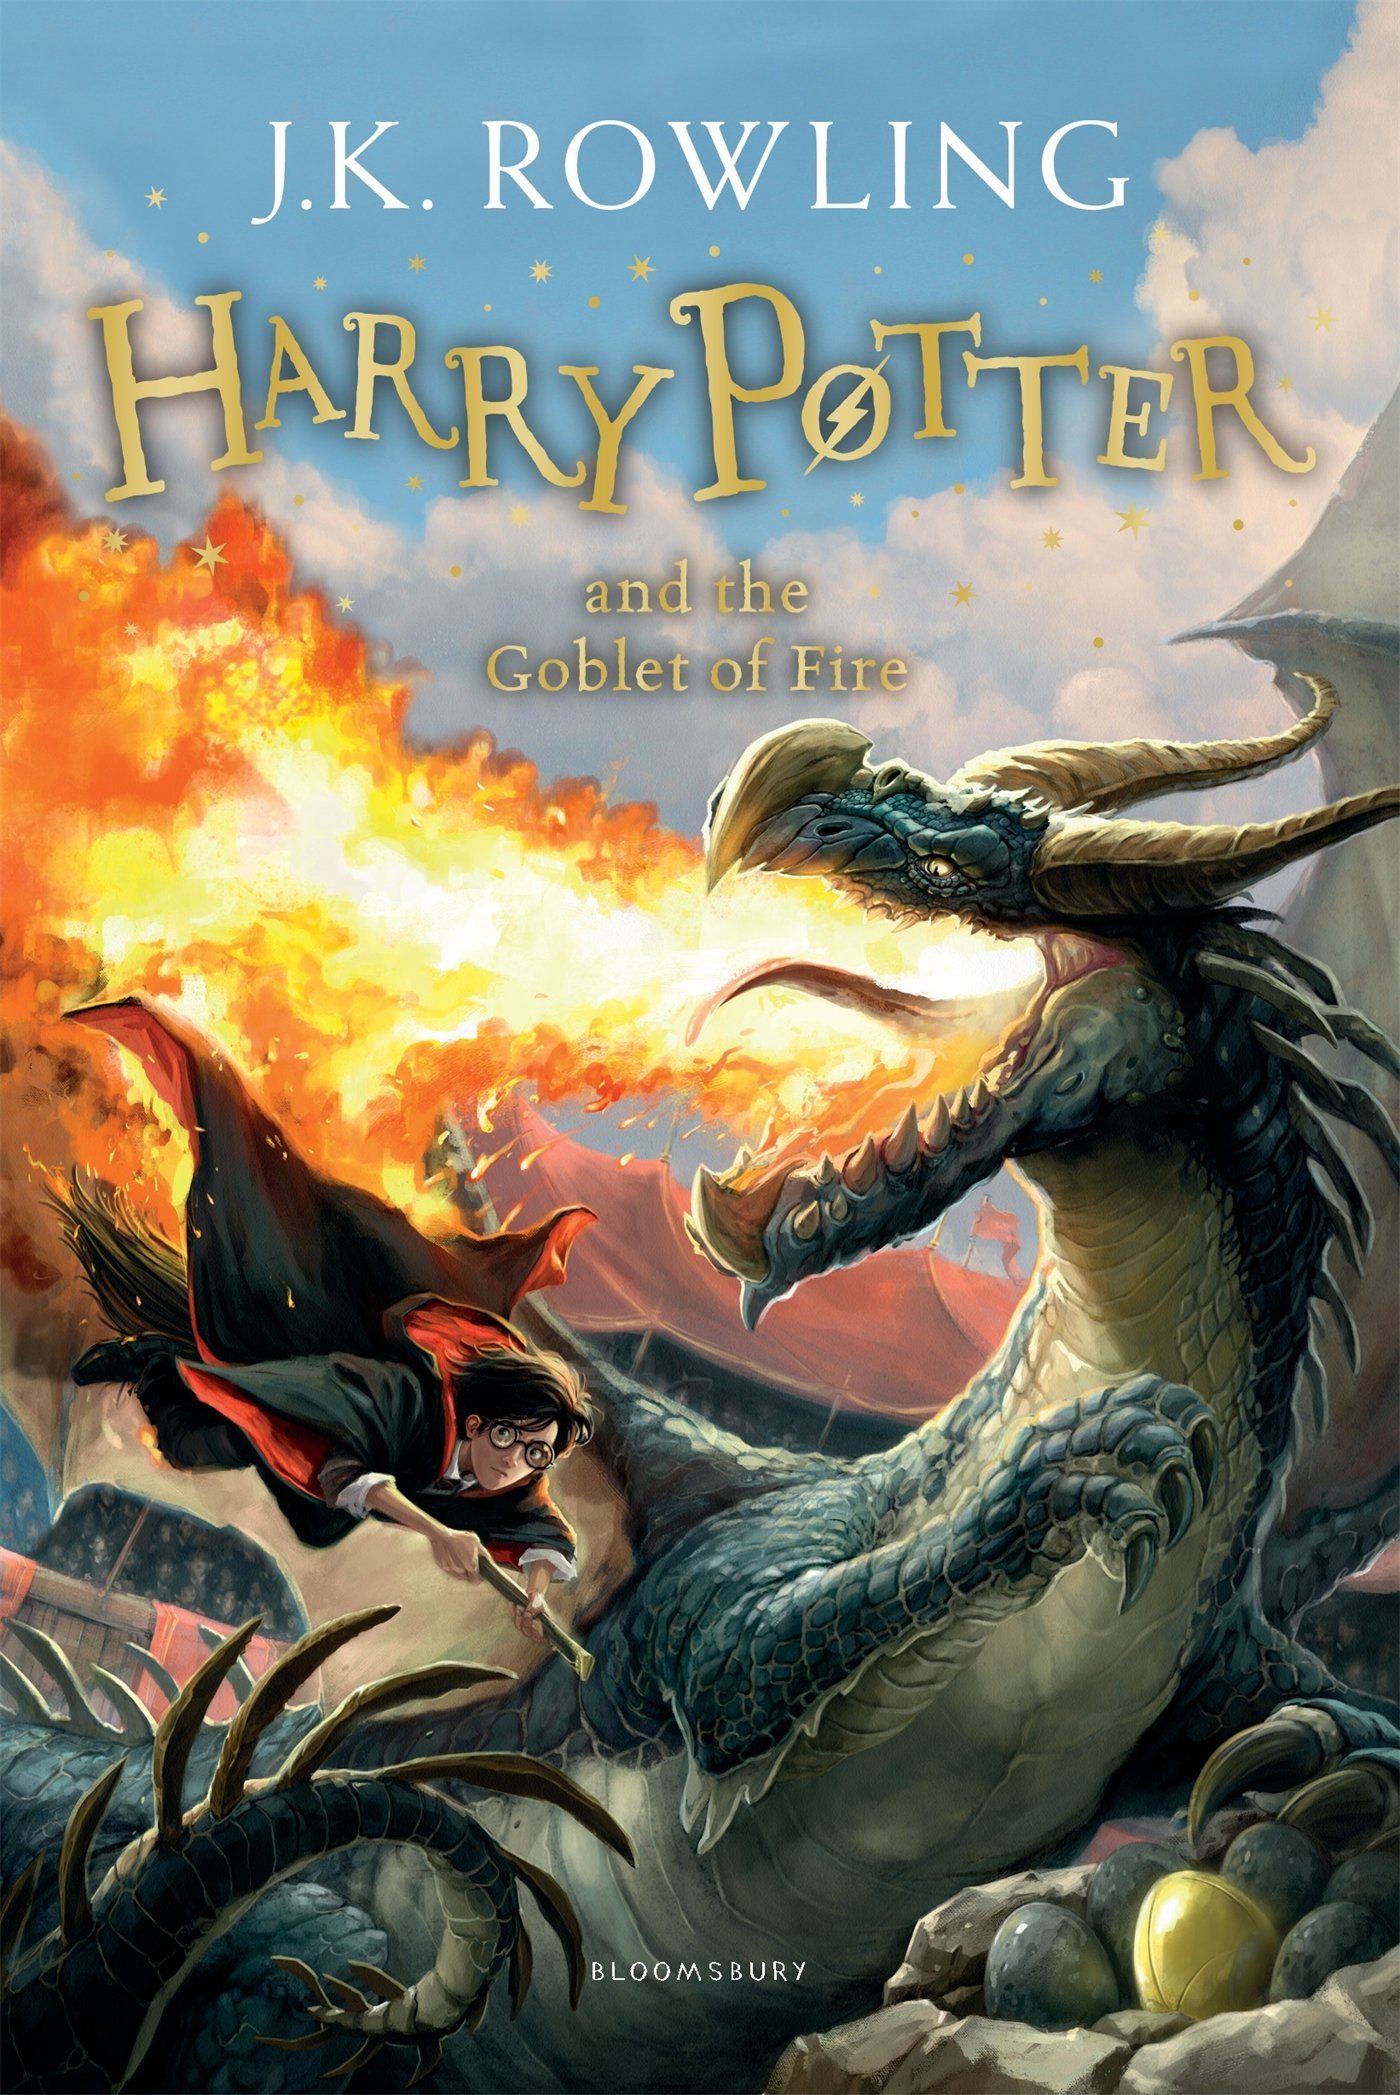 Harry Potter and the Goblet of Fire: Rowling, J.K.: 8601418346777